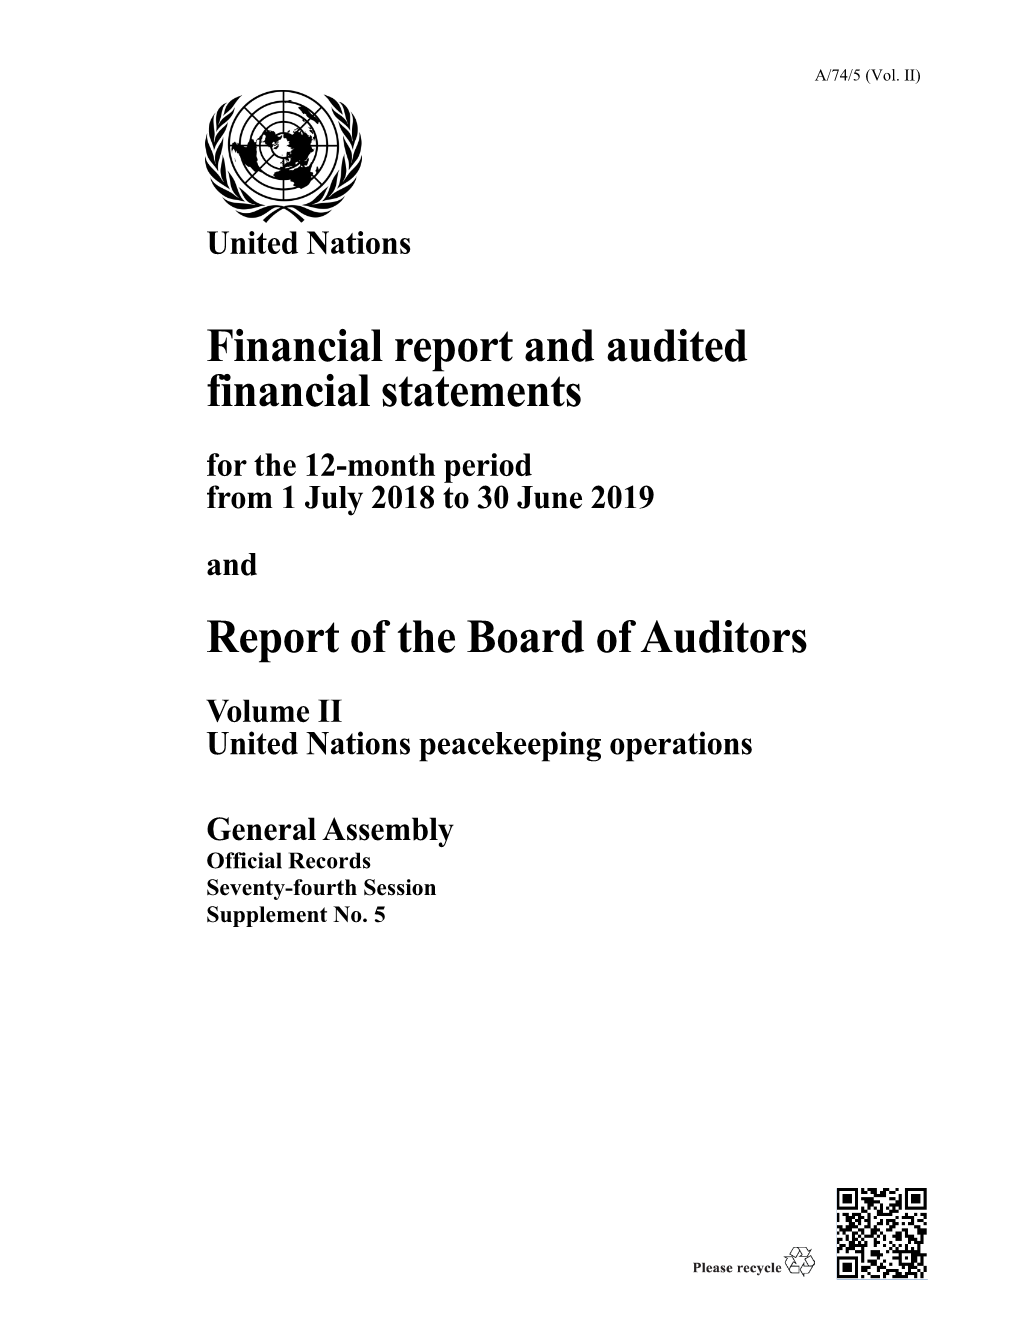 Financial Report and Audited Financial Statements Report of the Board Of